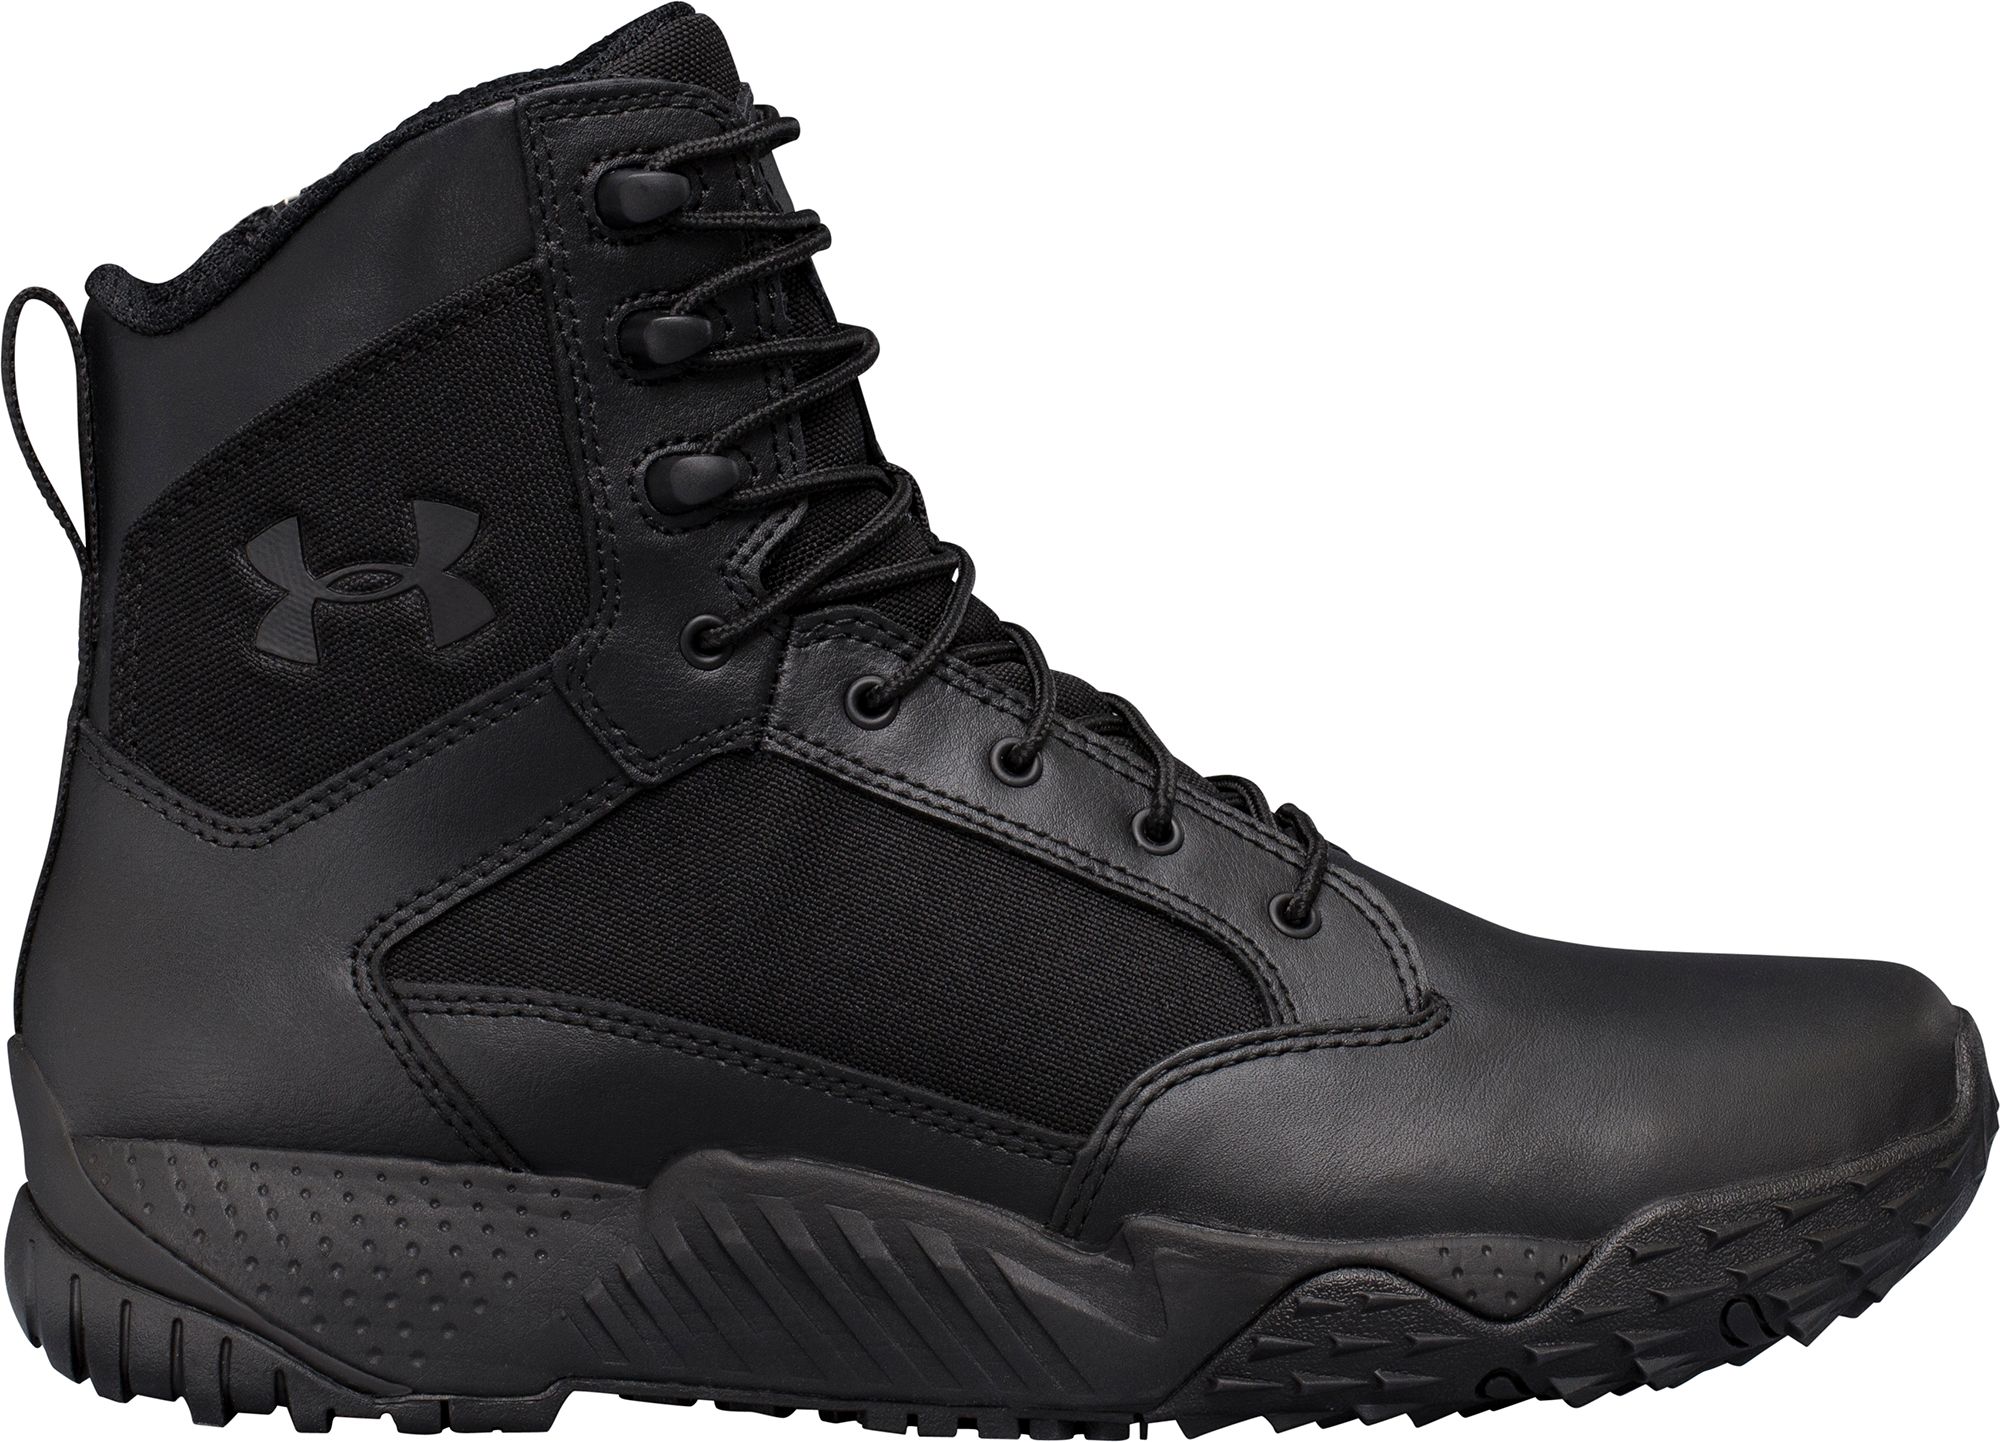 Tactical Boots | DICK'S Sporting Goods